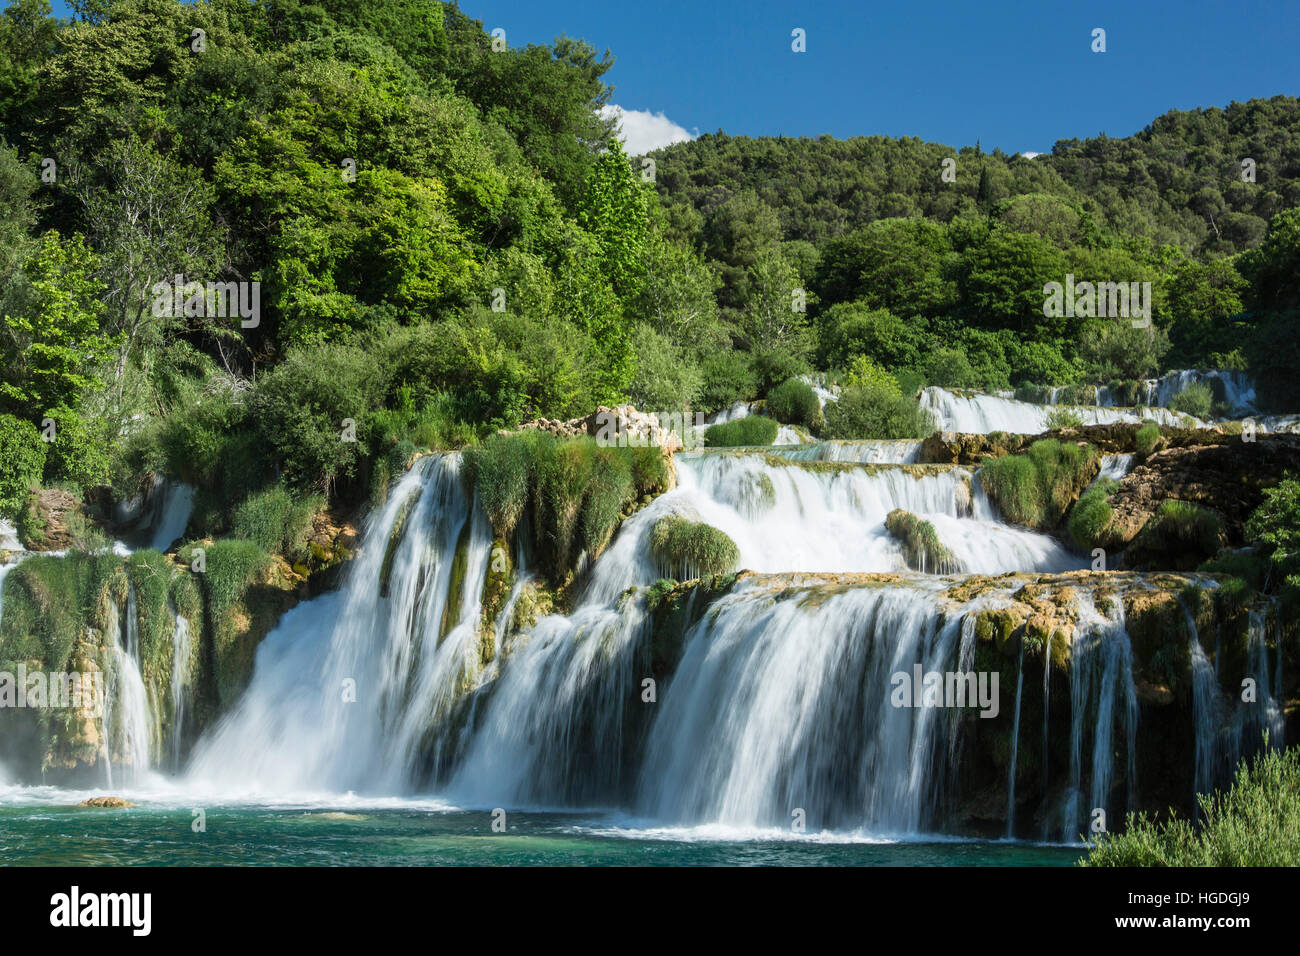 Waterfall in th national park Krka, Stock Photo